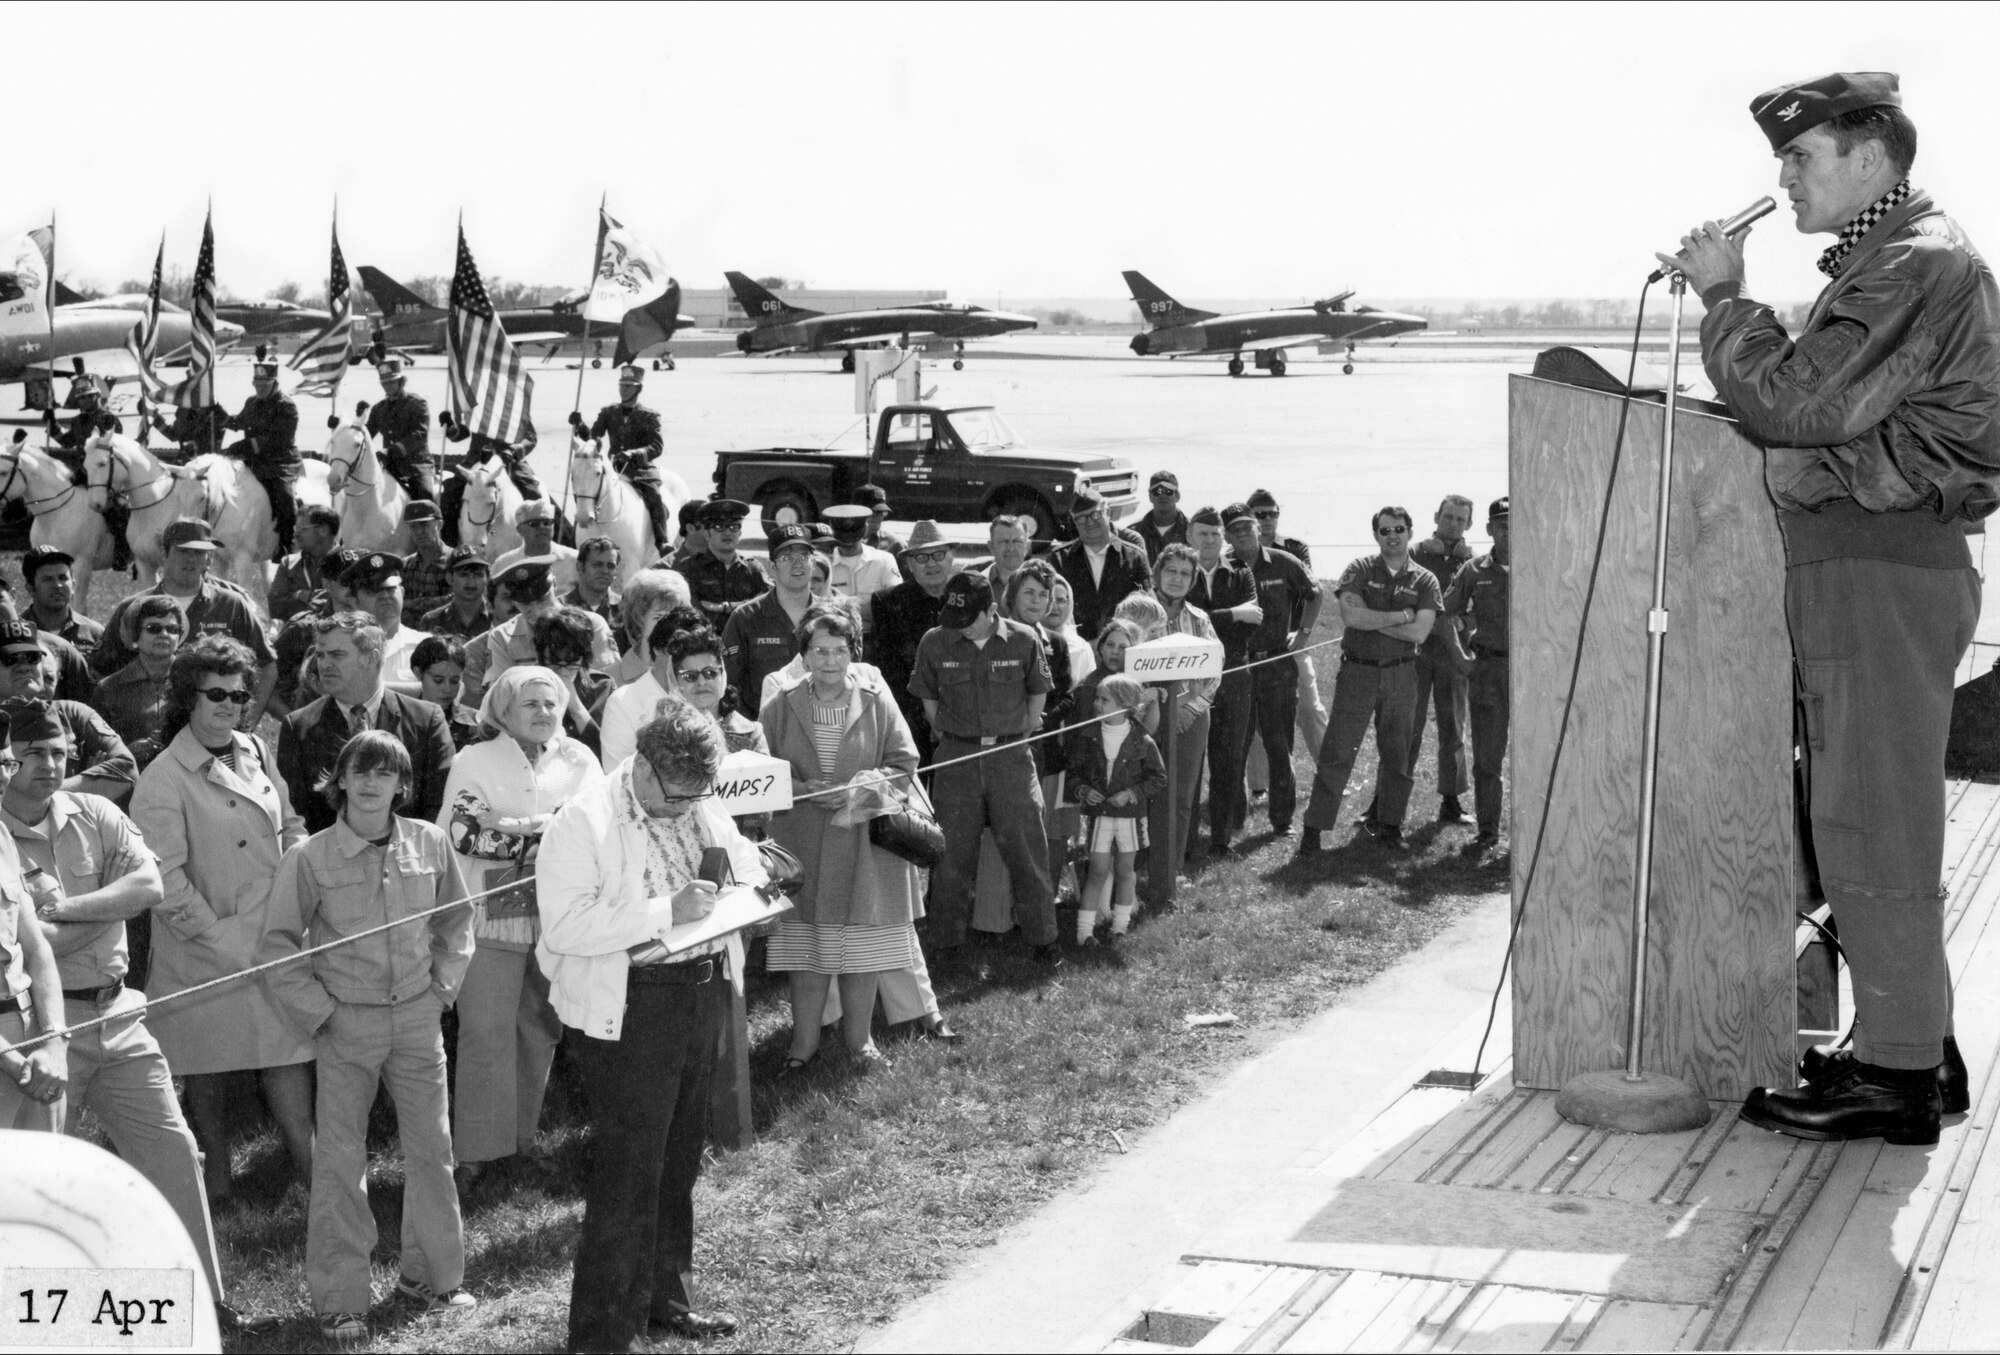 USAF Col George E. (Bud) Day talks to a crowd gathered at the Air National Guard’s 185th Tactical Fighter Group in Sioux City, Iowa.  Day had been released just one month earlier as a prisoner of war from North Vietnam. Bud Day was commander of the Misty FACs, who flew forward air control missions in risky parts of North Vietnam. Their job was to find and mark the targets for strike aircraft. Day was shot down and captured in August of 1967 and was held and until March of 1973.
